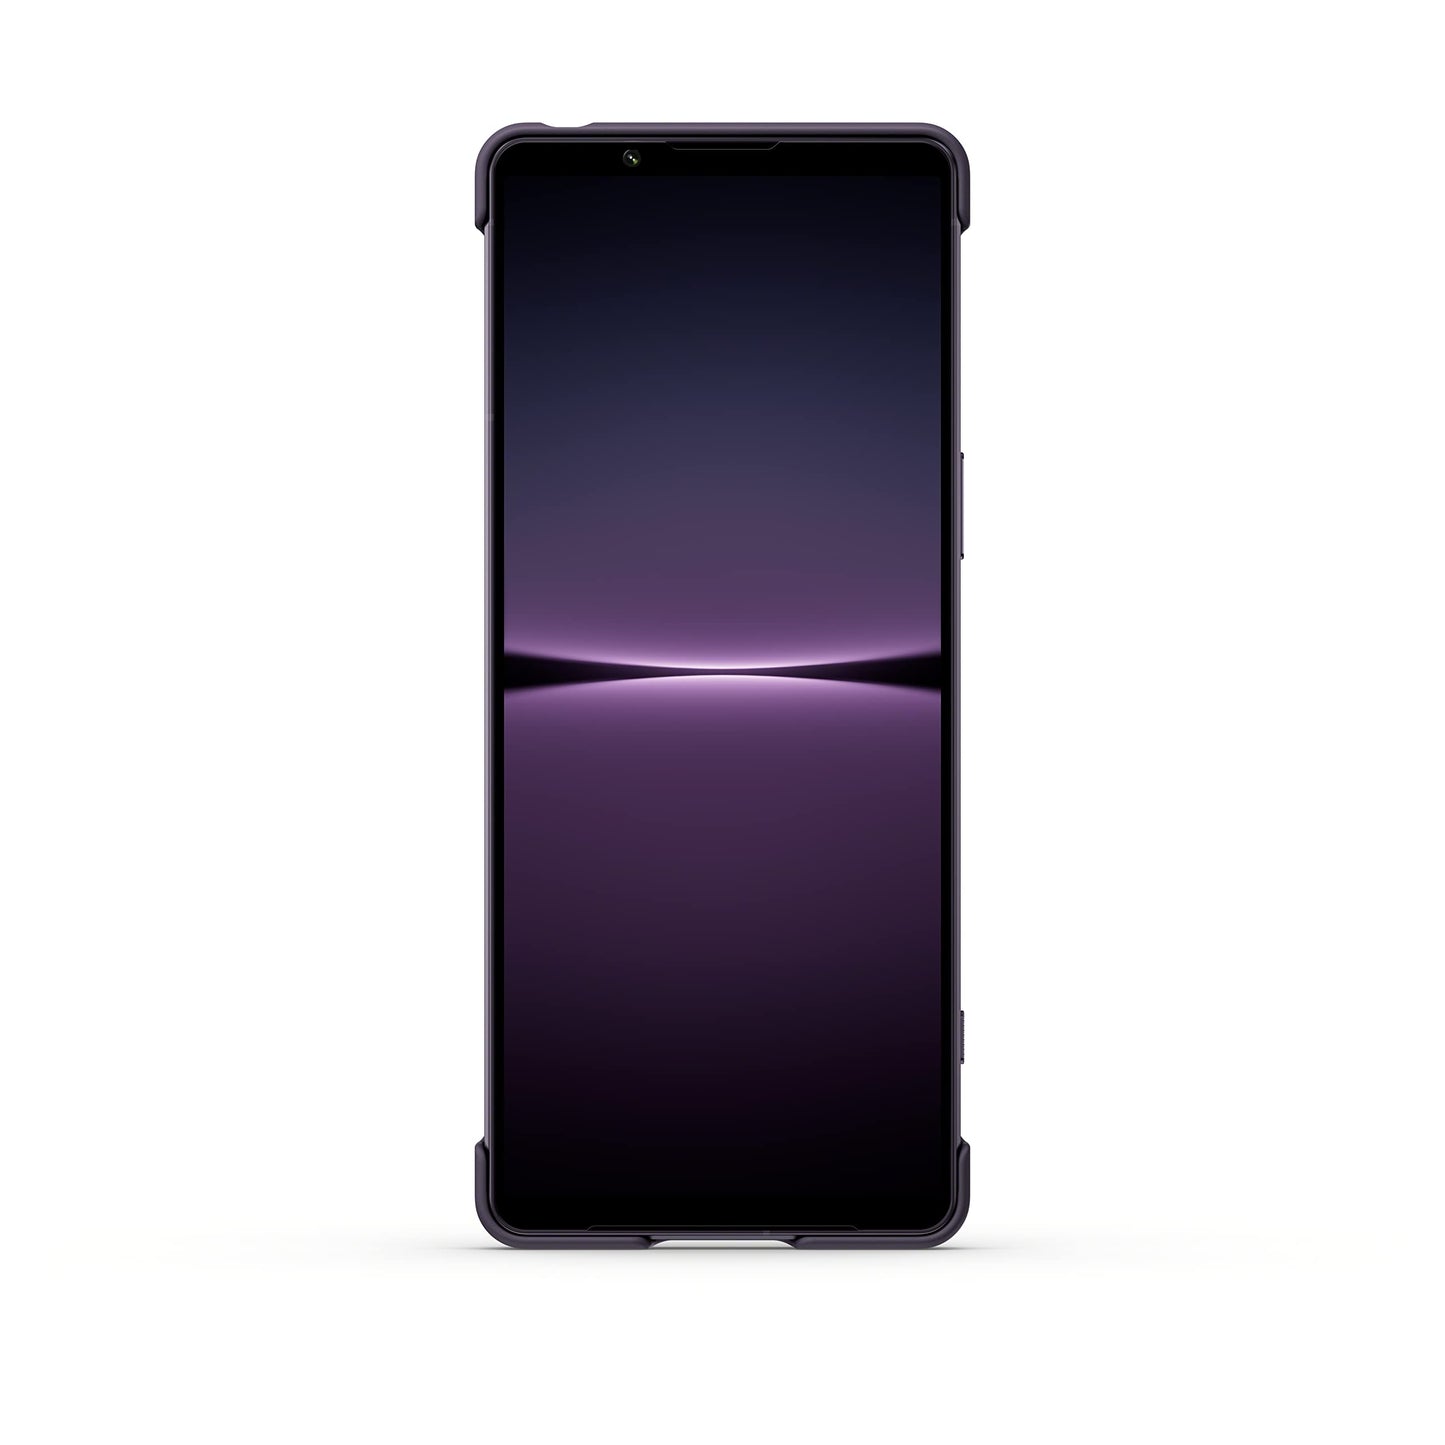 Sony Official Case with Stand for Xperia 1 IV - XQZCBCT/V Purple